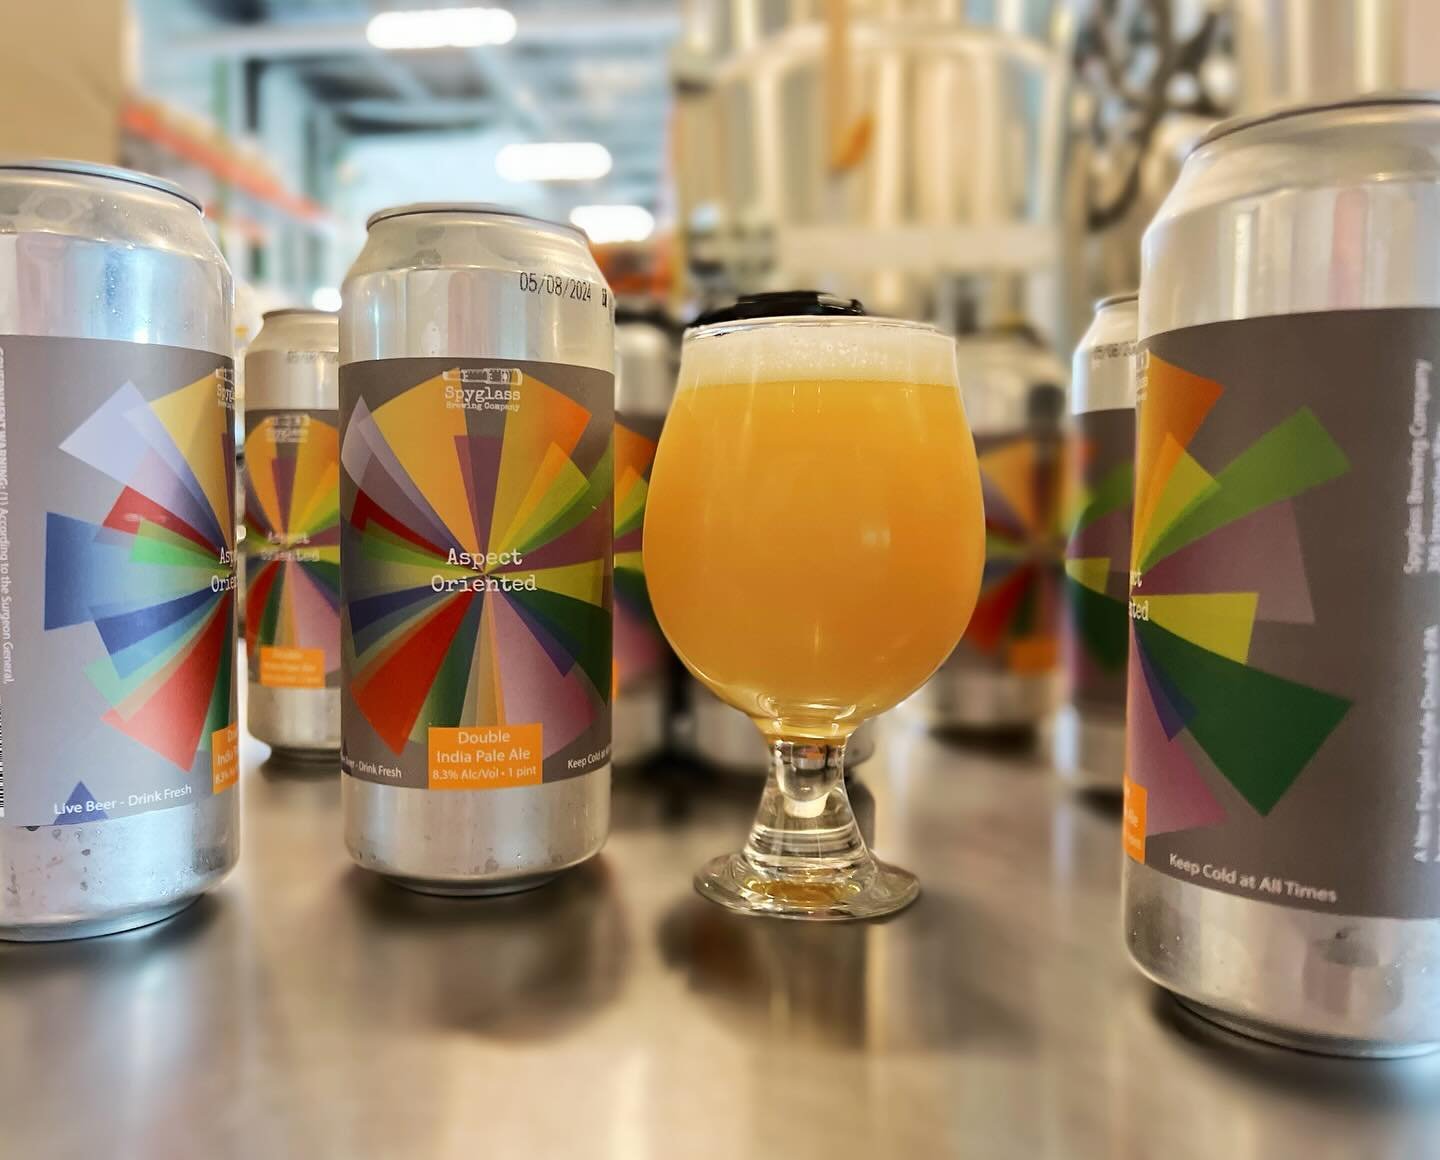 FRESH RELEASE - Aspect Oriented

8.3% ABV Double New England IPA
Brewed with Citra, Galaxy, and Motueka hops that bring forth a tropical aroma with tasting notes of berries, crisp pear, and grapefruit pith hop bitterness. 

Grab it in cans &amp; on d